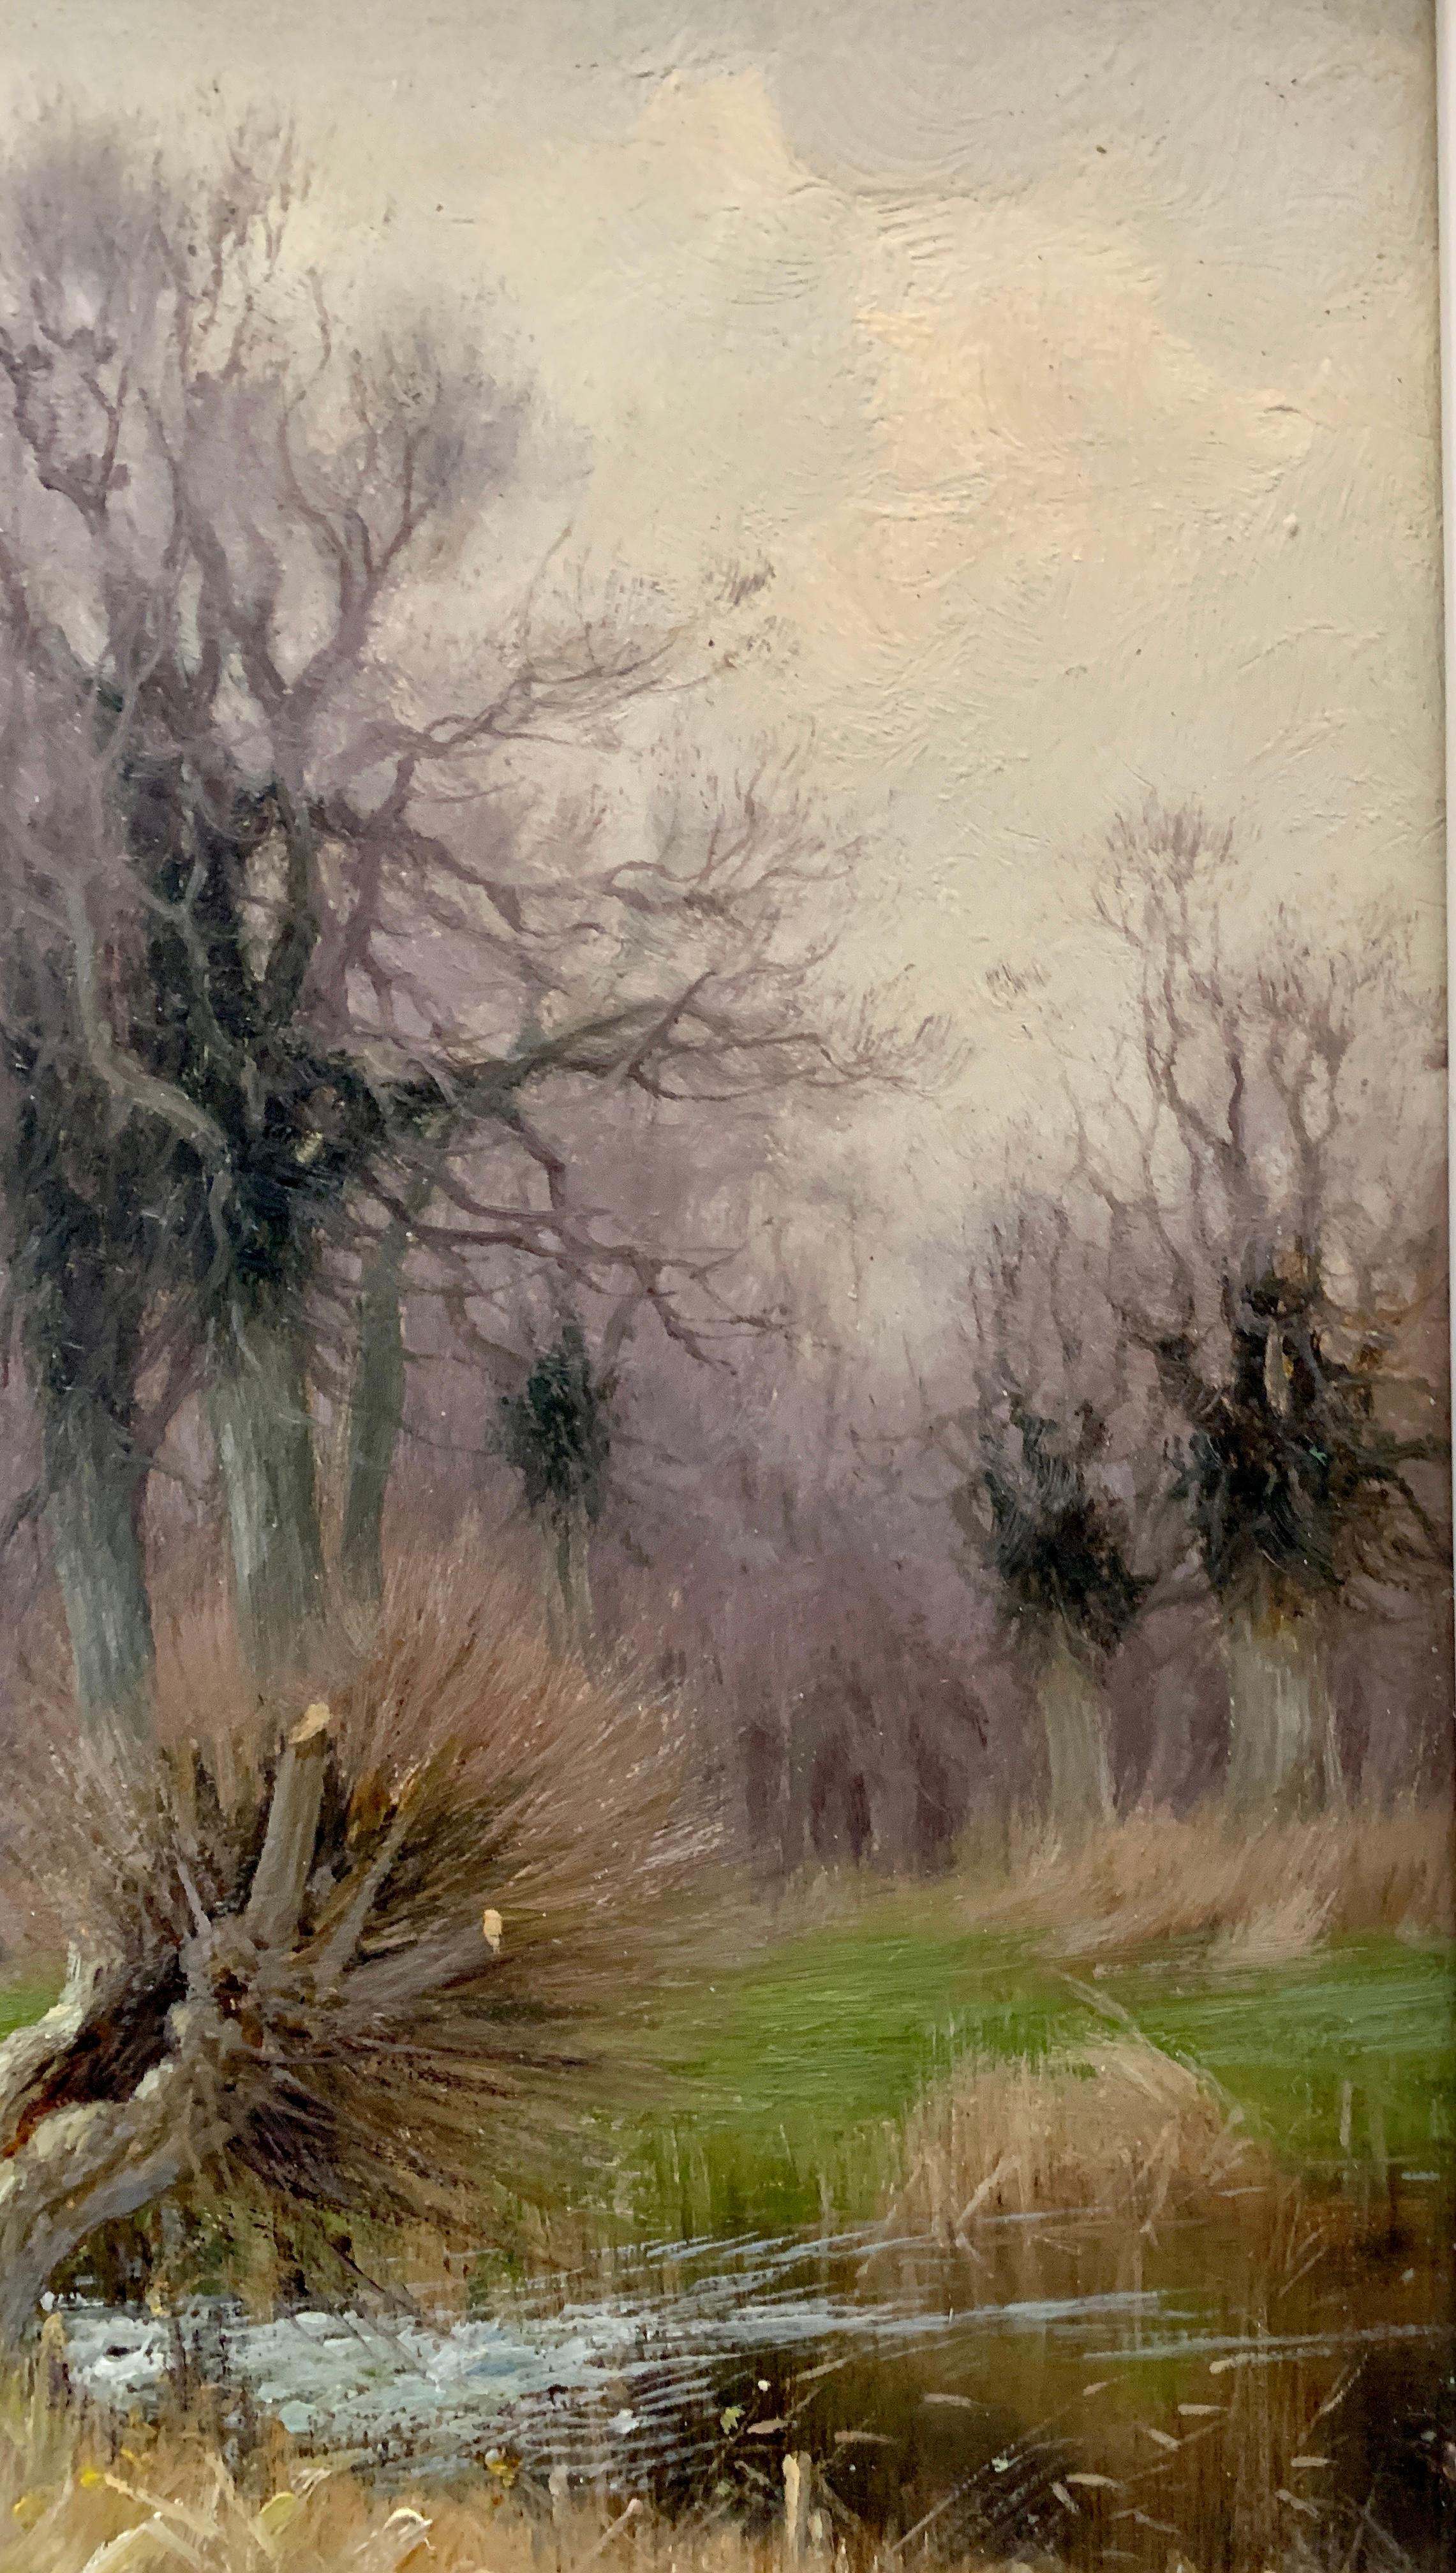 Early 20th-Century Antique English Autumn/fall river landscape.

Sidney Pike was a prolific landscape and genre artist exhibiting between 1880-1907, London based originally he seems to have lived around the south coast and eventually retired to the